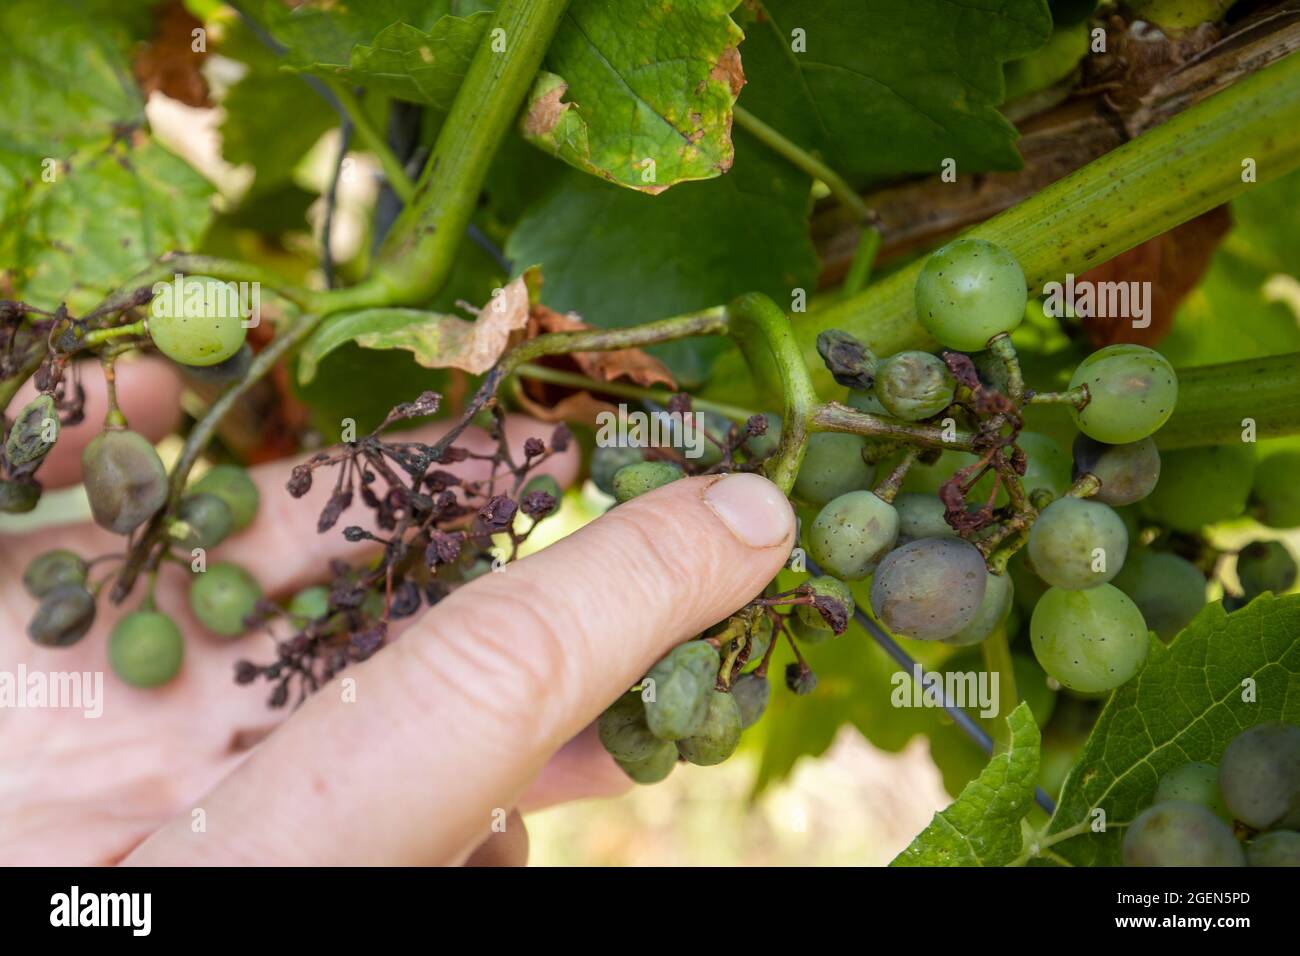 Randersacker, Germany. 19th Aug, 2021. Beate Leopold, managing director of Weinbauring Franken, shows the infestation of fungal spores of the so-called downy mildew (peronospora) on grapes of a vine. The fungal disease is threatening the grapes in some vineyards in Franconia. After the many rains in spring and summer, the fungus is a widespread problem throughout Germany, but also in other European countries. Credit: Daniel Karmann/dpa/Alamy Live News Stock Photo